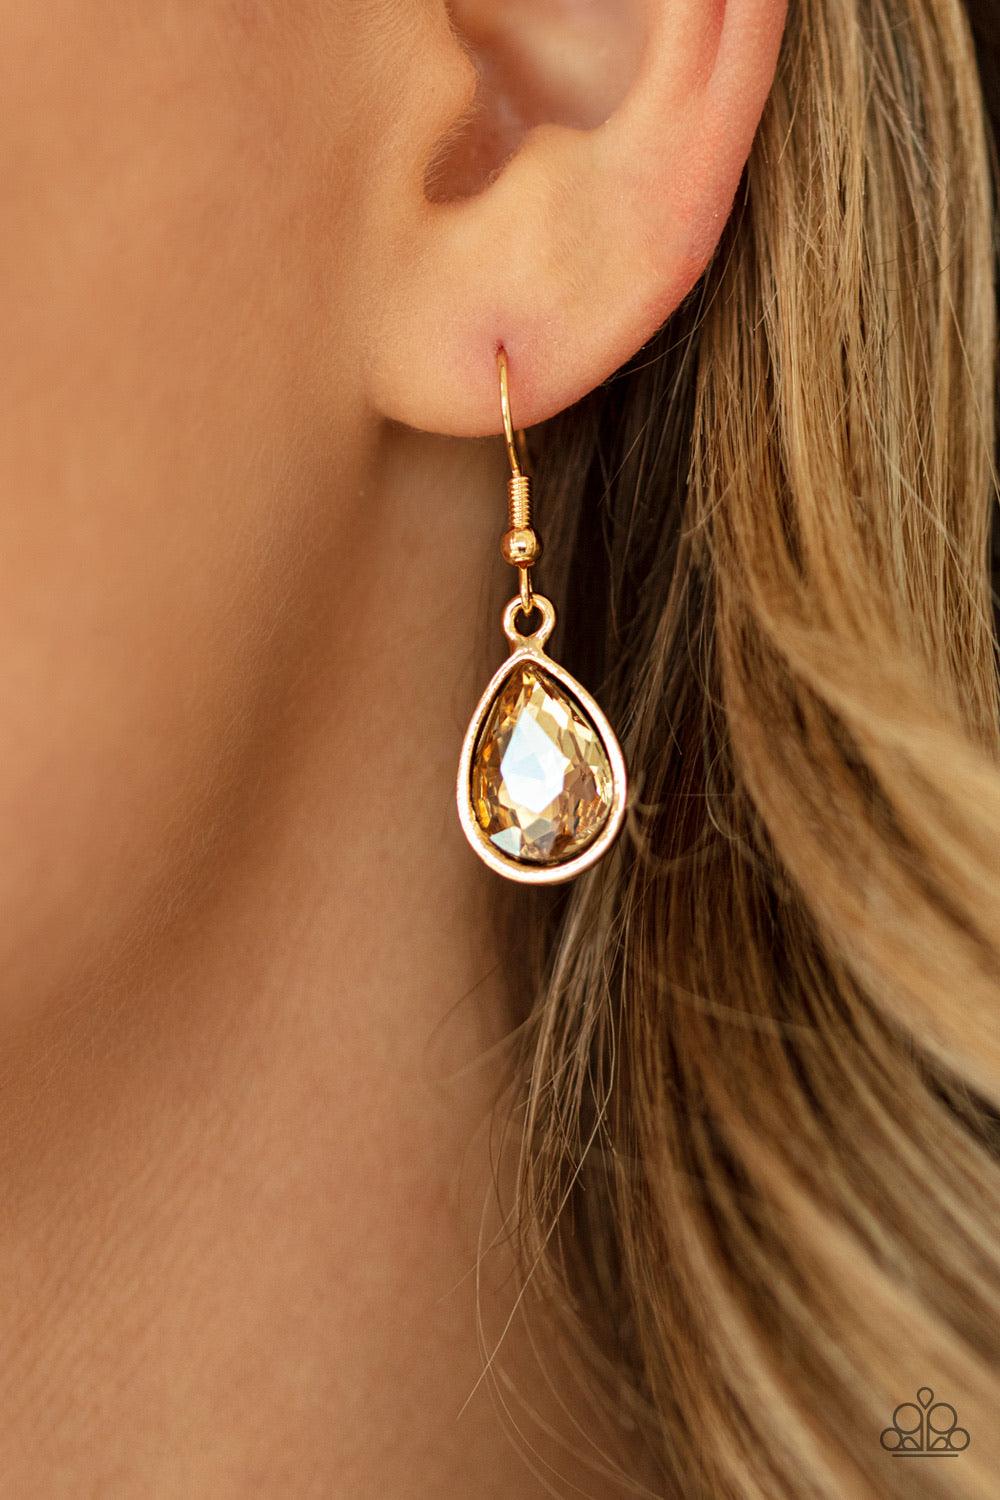 Paparazzi Accessories I Want It All - Gold A sassy combination of golden and white teardrop gems delicately link into a stunning piece below the collar. Dainty white rhinestones are scattered through the piece for unexpected hints of shimmer. Features an